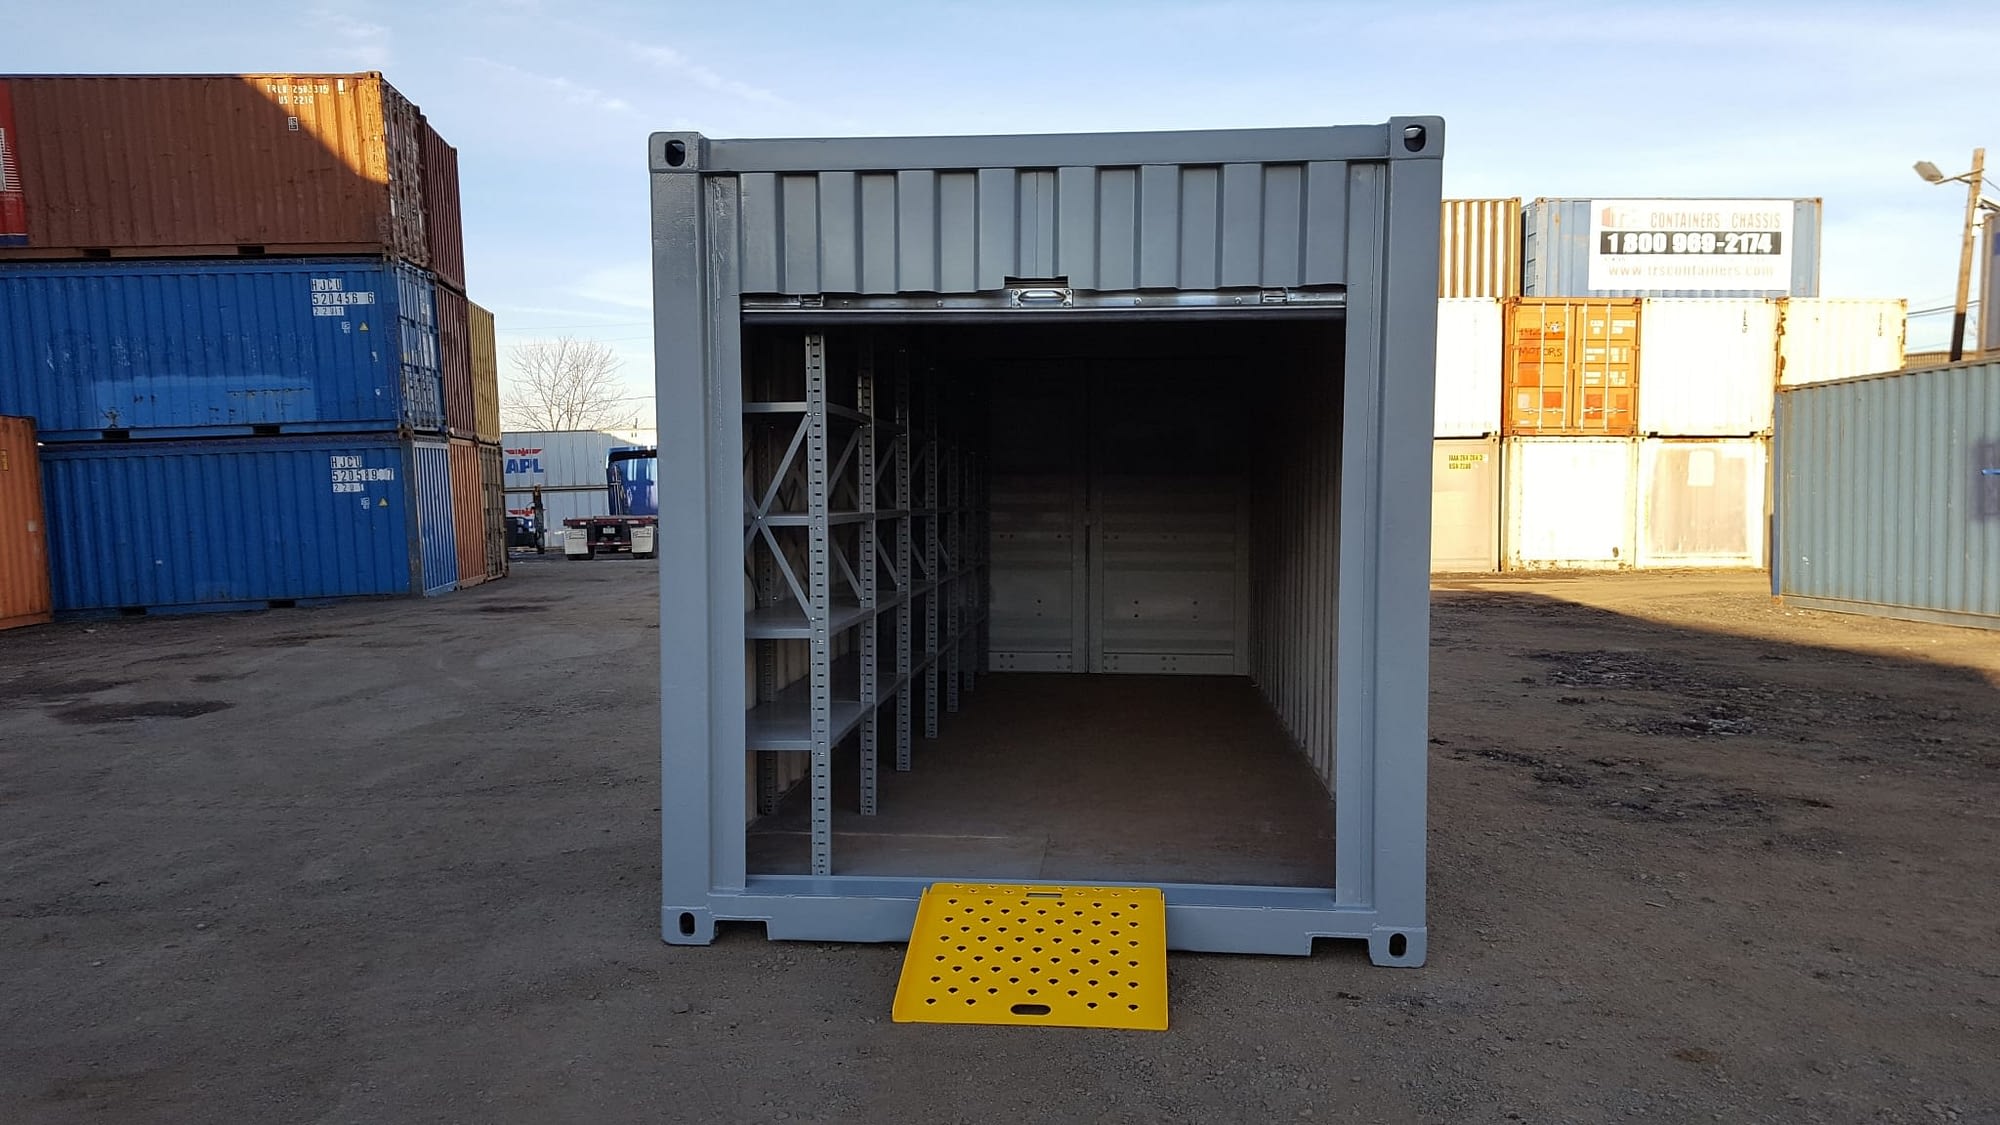 TRS Containers modifies standard steel ISO shipping containers into portable modular equipment solutions